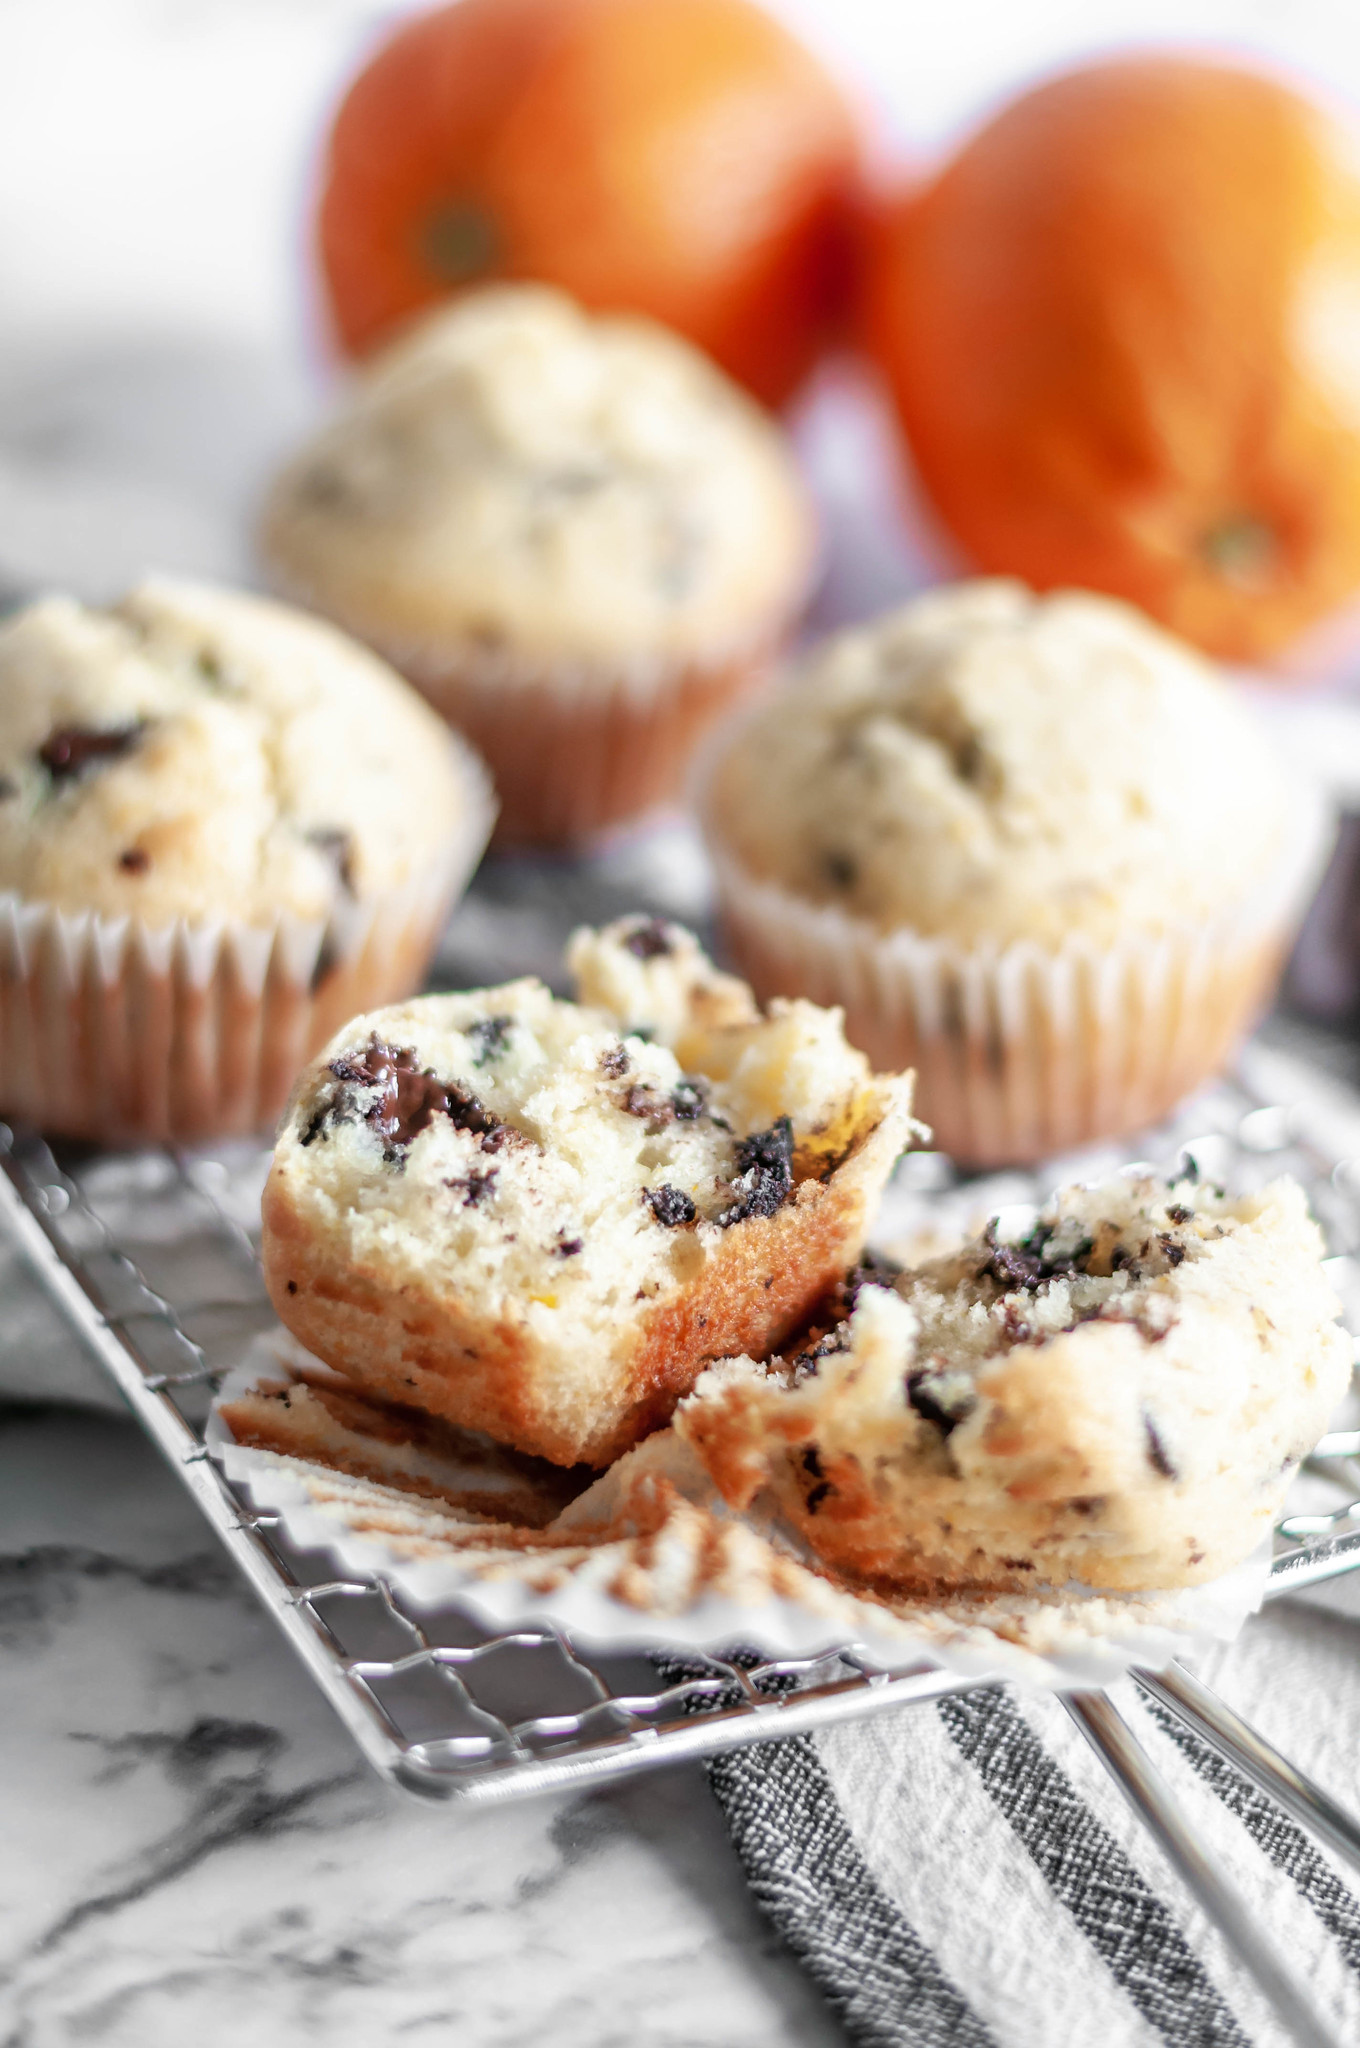 Orange Chocolate Chunk Muffins are light and easy to mix up. Dotted with dark chocolate chunks and sweet orange zest.